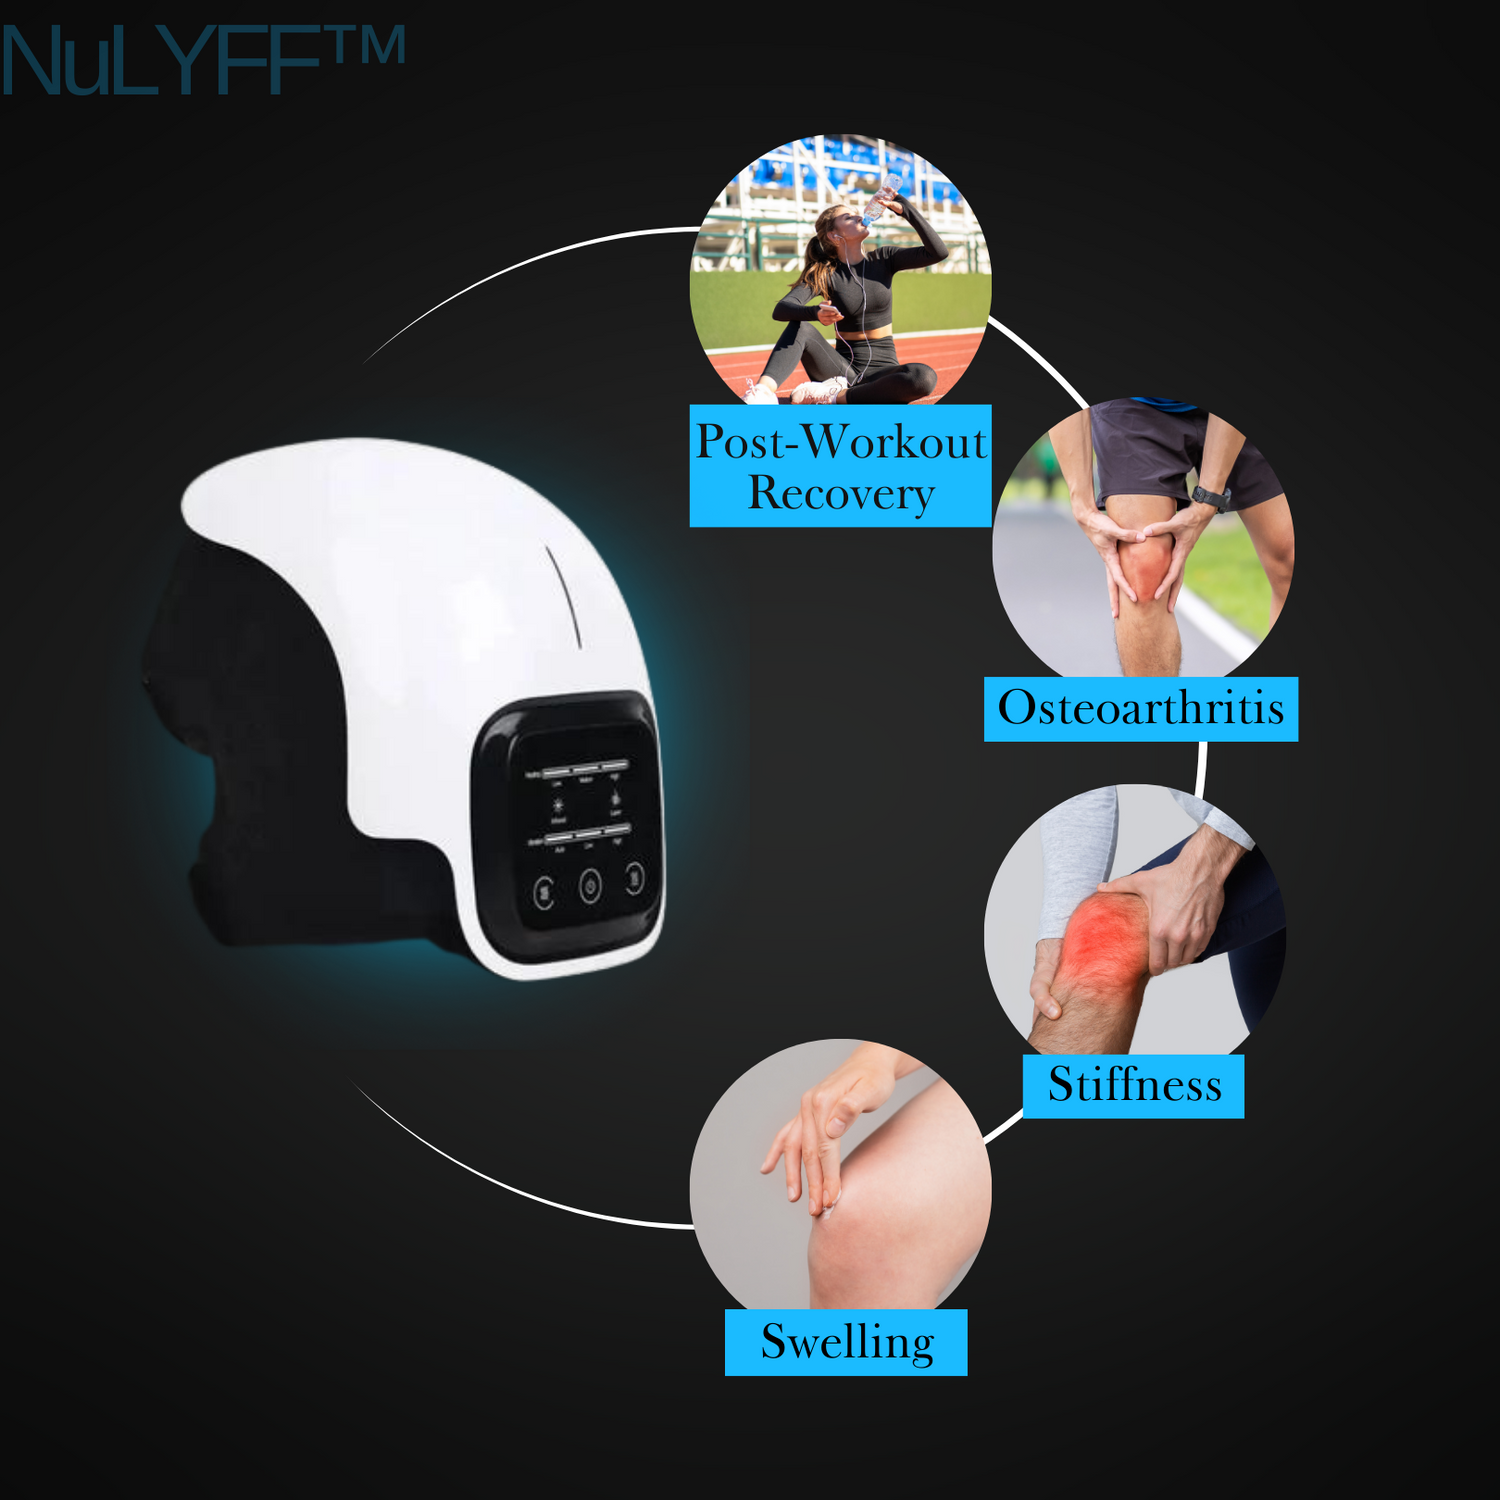 Image of NuLYFF™ Knee Massager - used to treat for osteoarthritis, stiffness, swelling, and post-workout recovery, ensuring improved comfort and mobility.